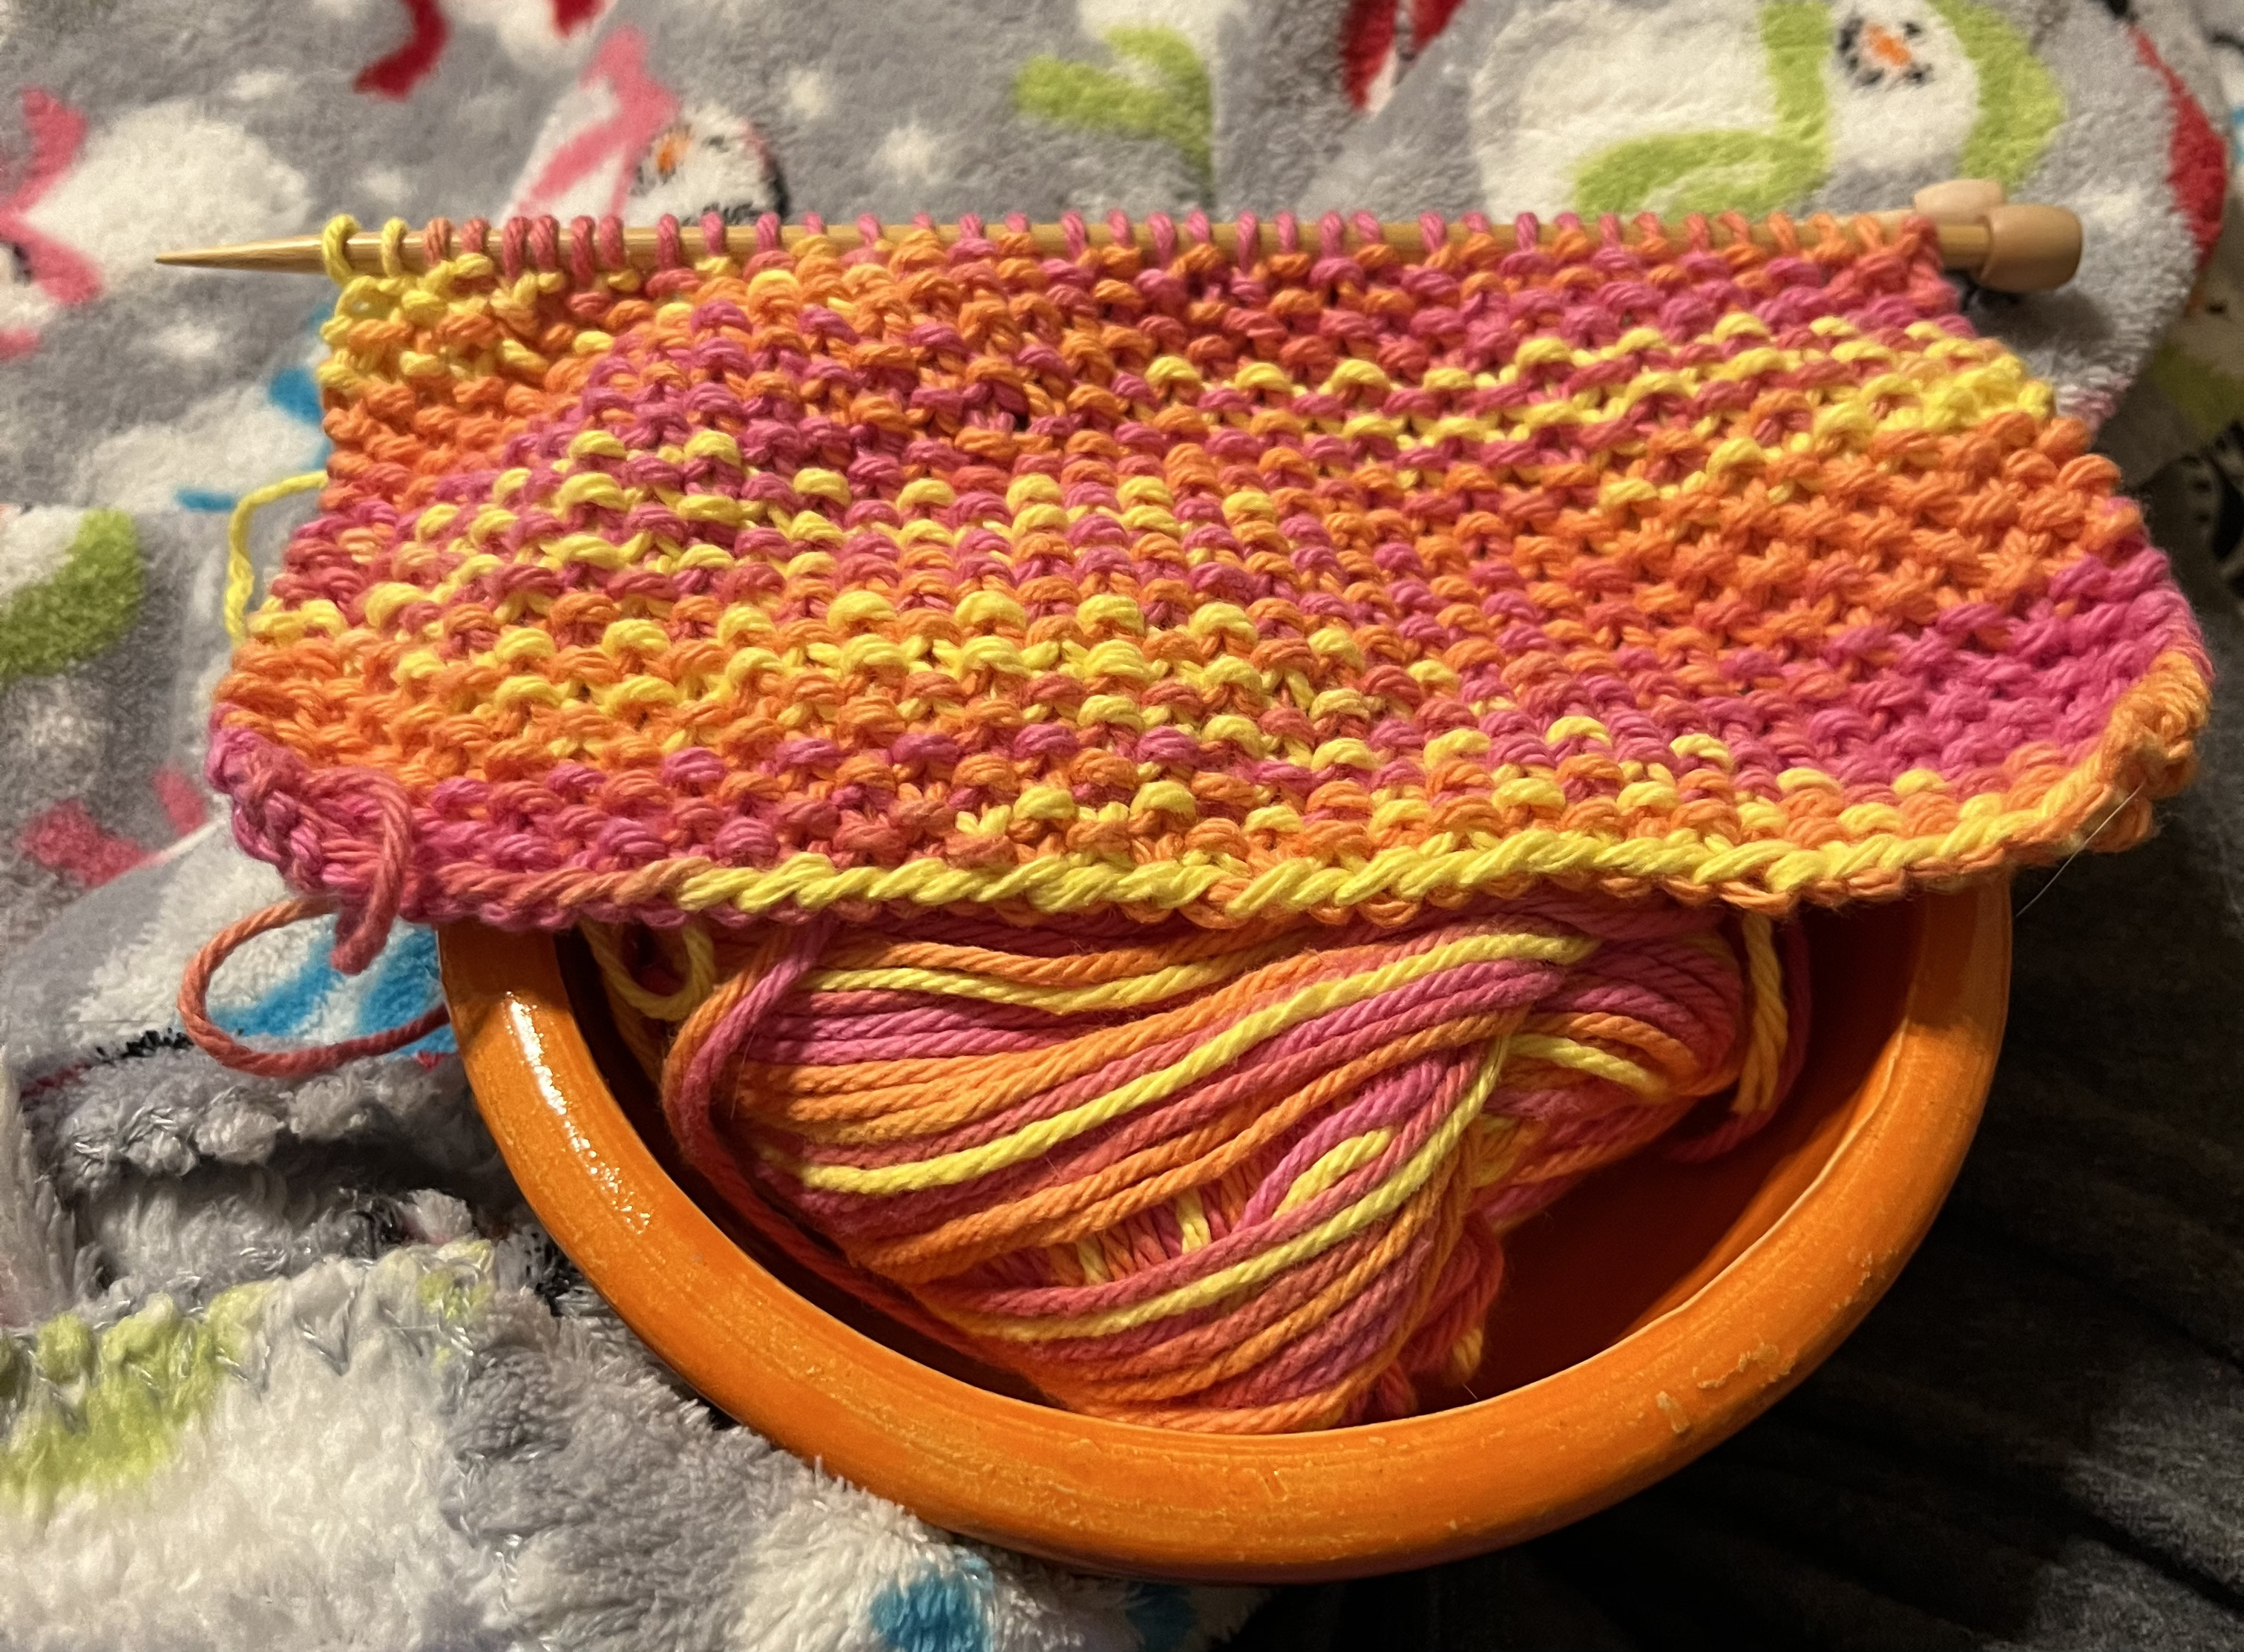 A partly completed knitted dishcloth in seed stitch.  It is pink, orange, and yellow, and sits on top of an orange bowl.